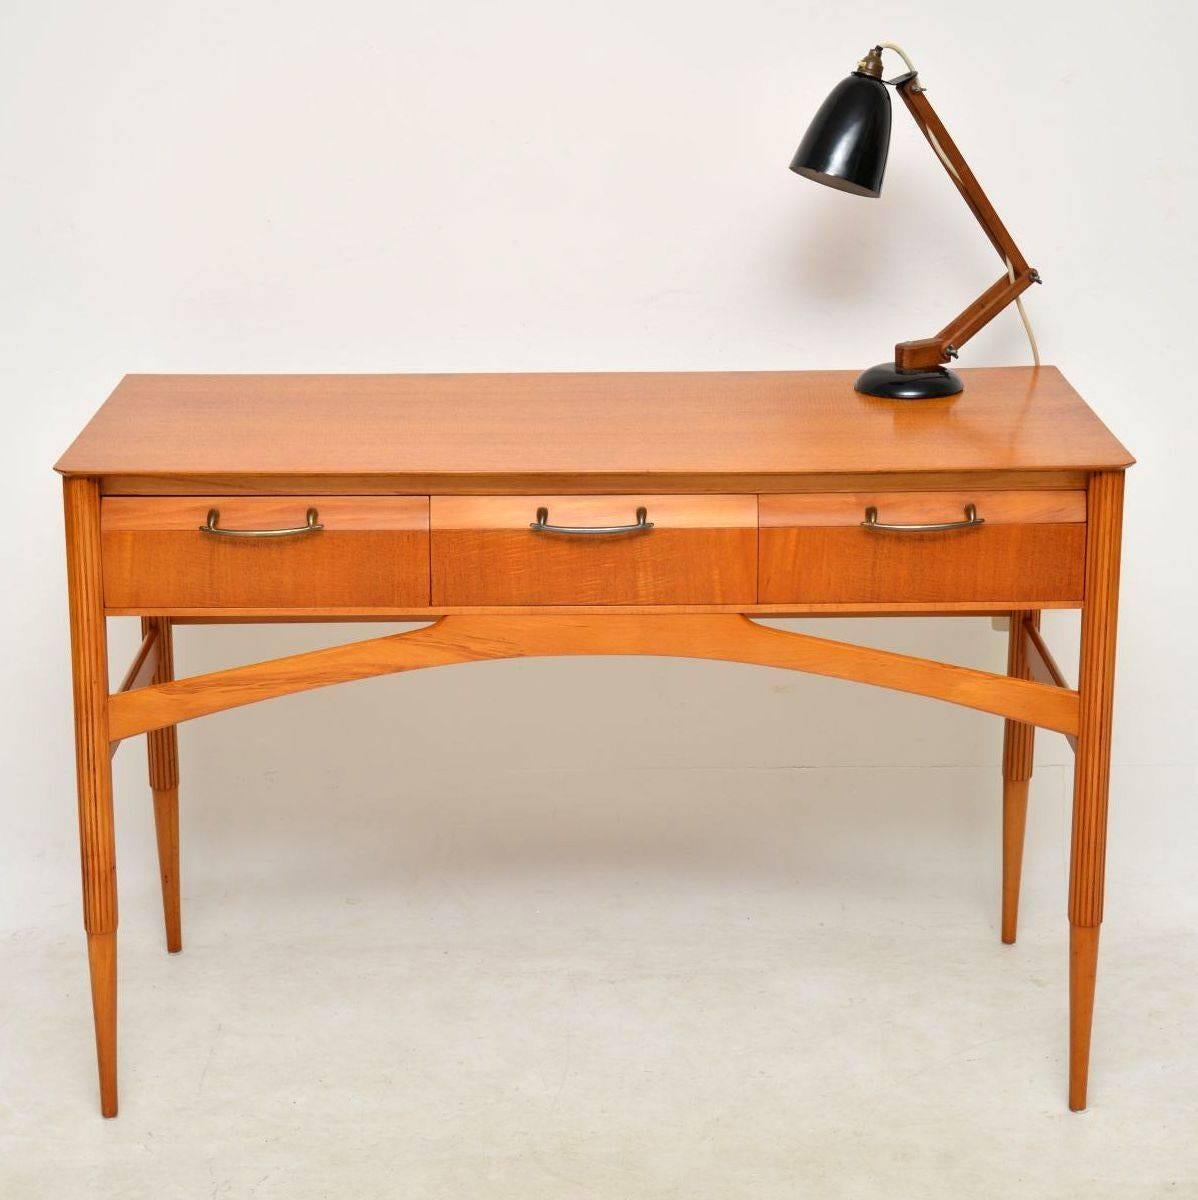 A beautifully designed and top quality vintage desk in satinwood, this dates from the 1950’s. It was originally a dressing table but is a perfect size for a desk, so could be used as either really. We have had this stripped and re-polished to a very